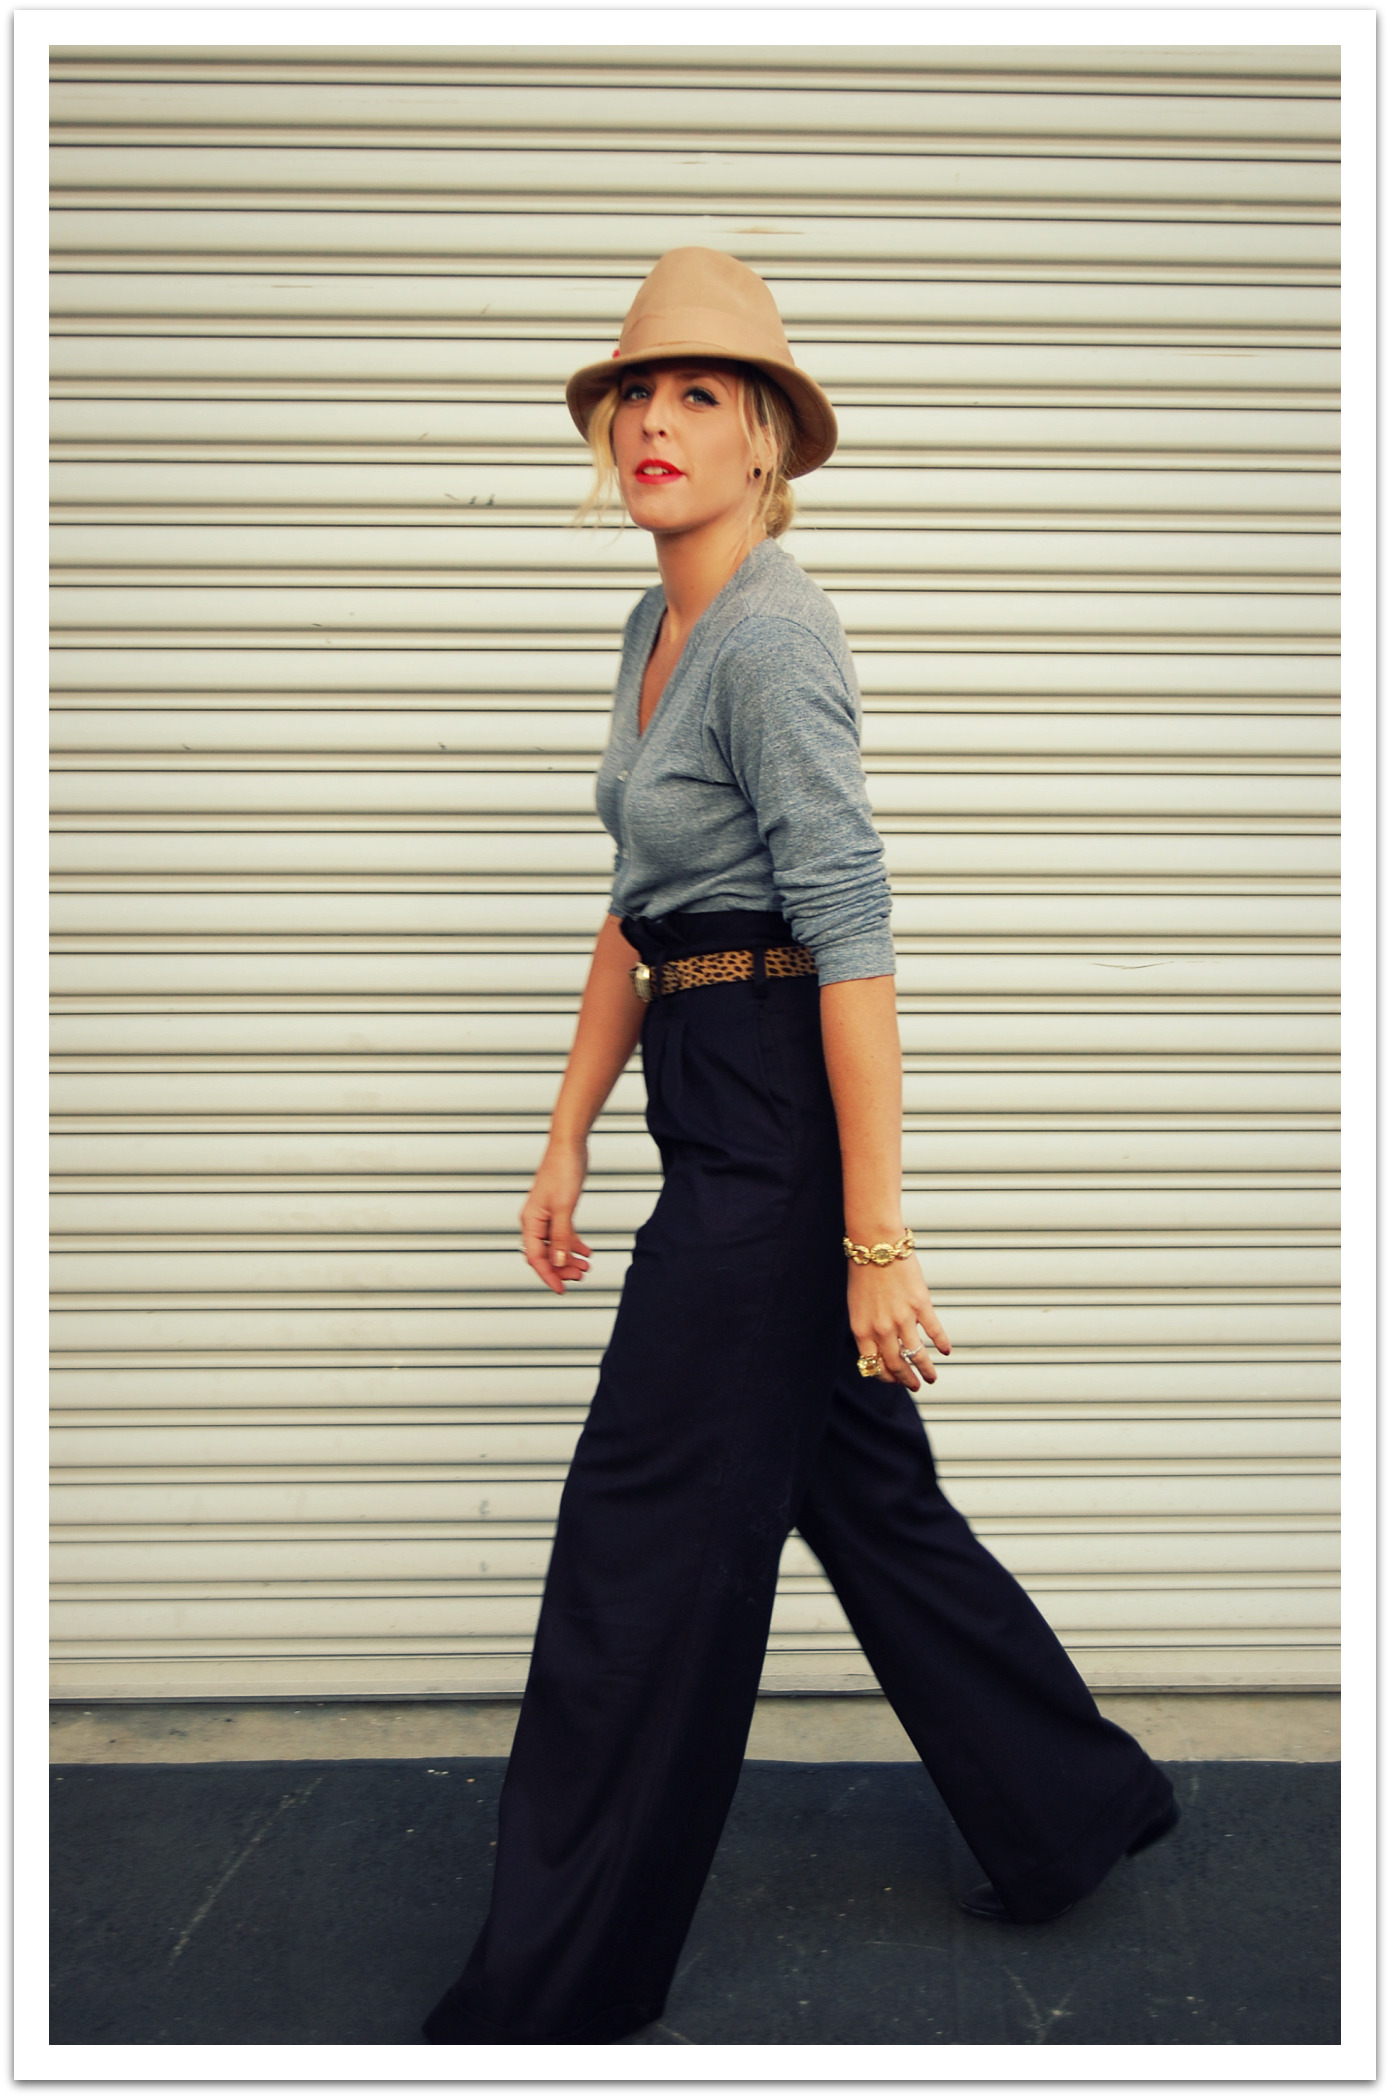 Let's Talk Wide Leg Trousers! YES or NO? | Fashion Tag Blog